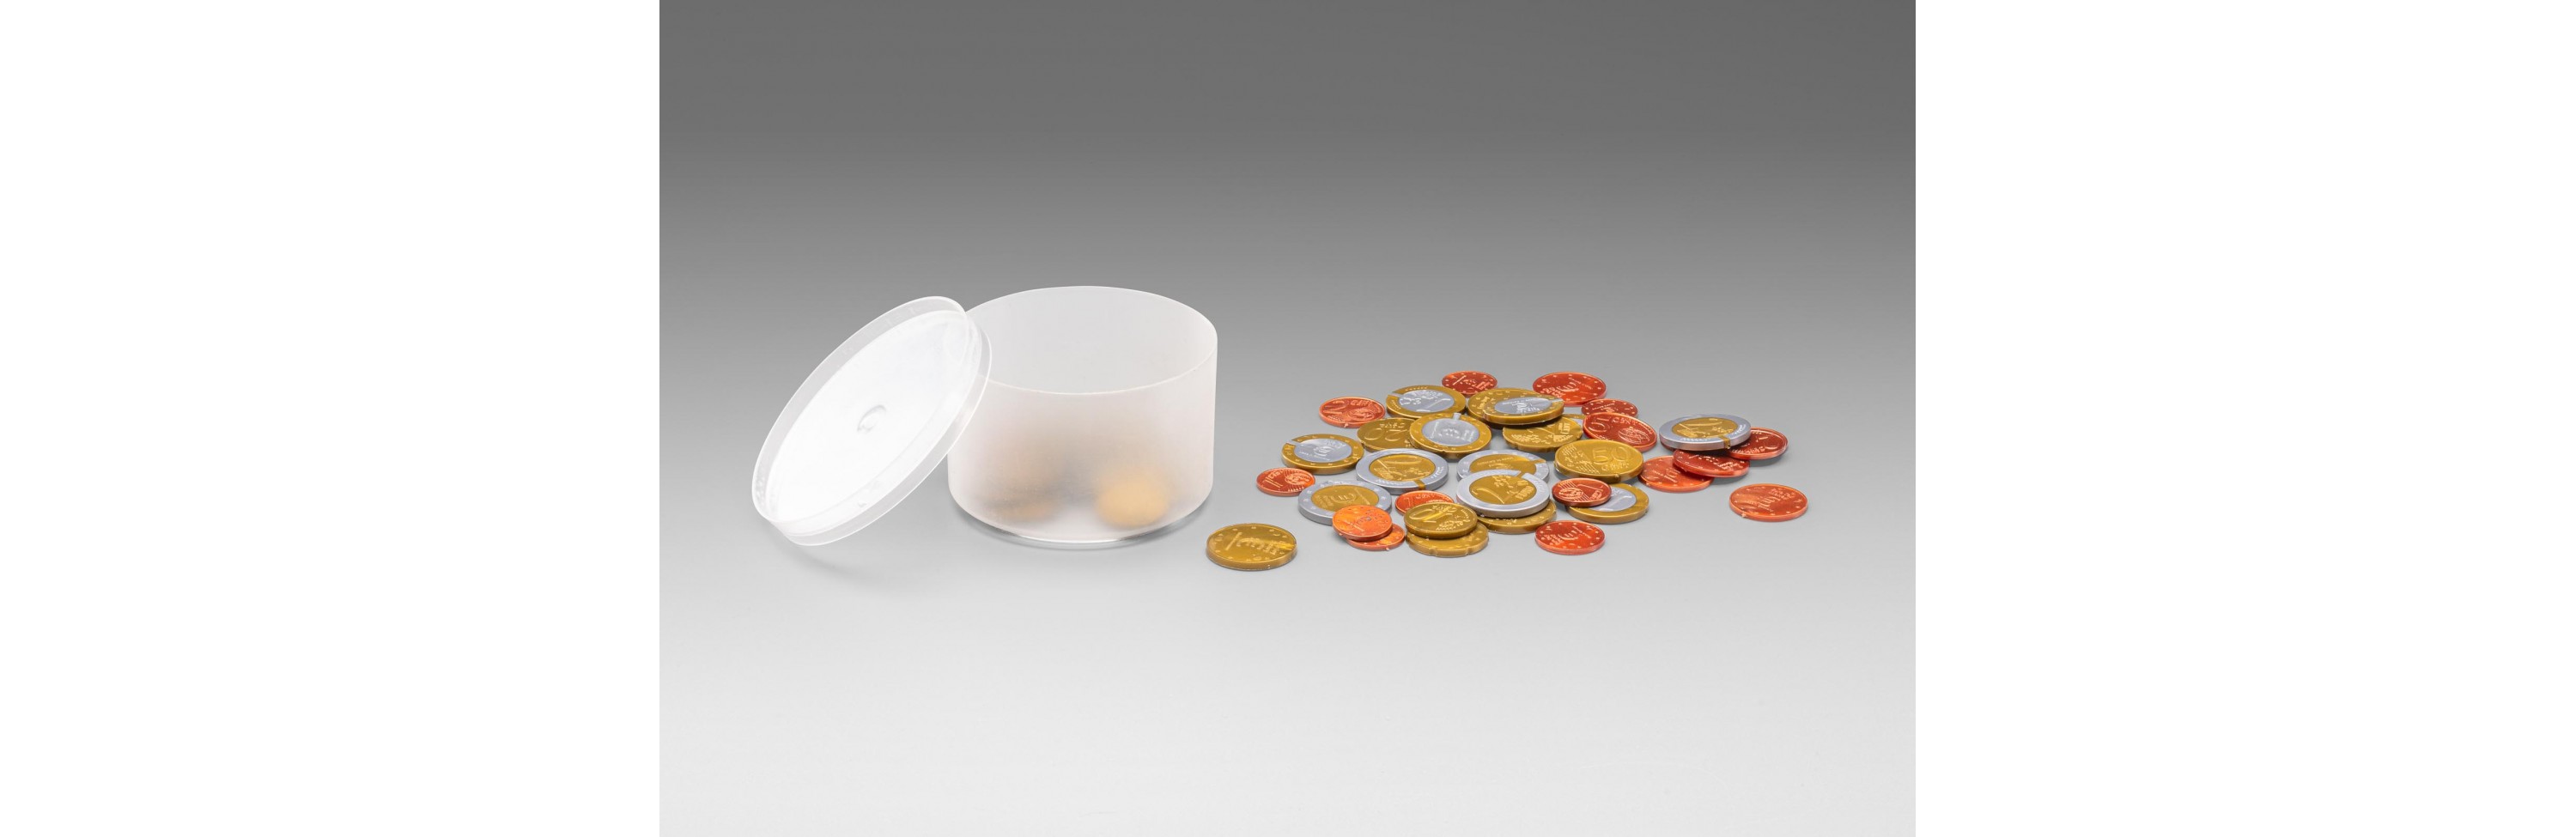 Wissner® active learning - Euro Coins small set (50 pcs) RE-Plastic®